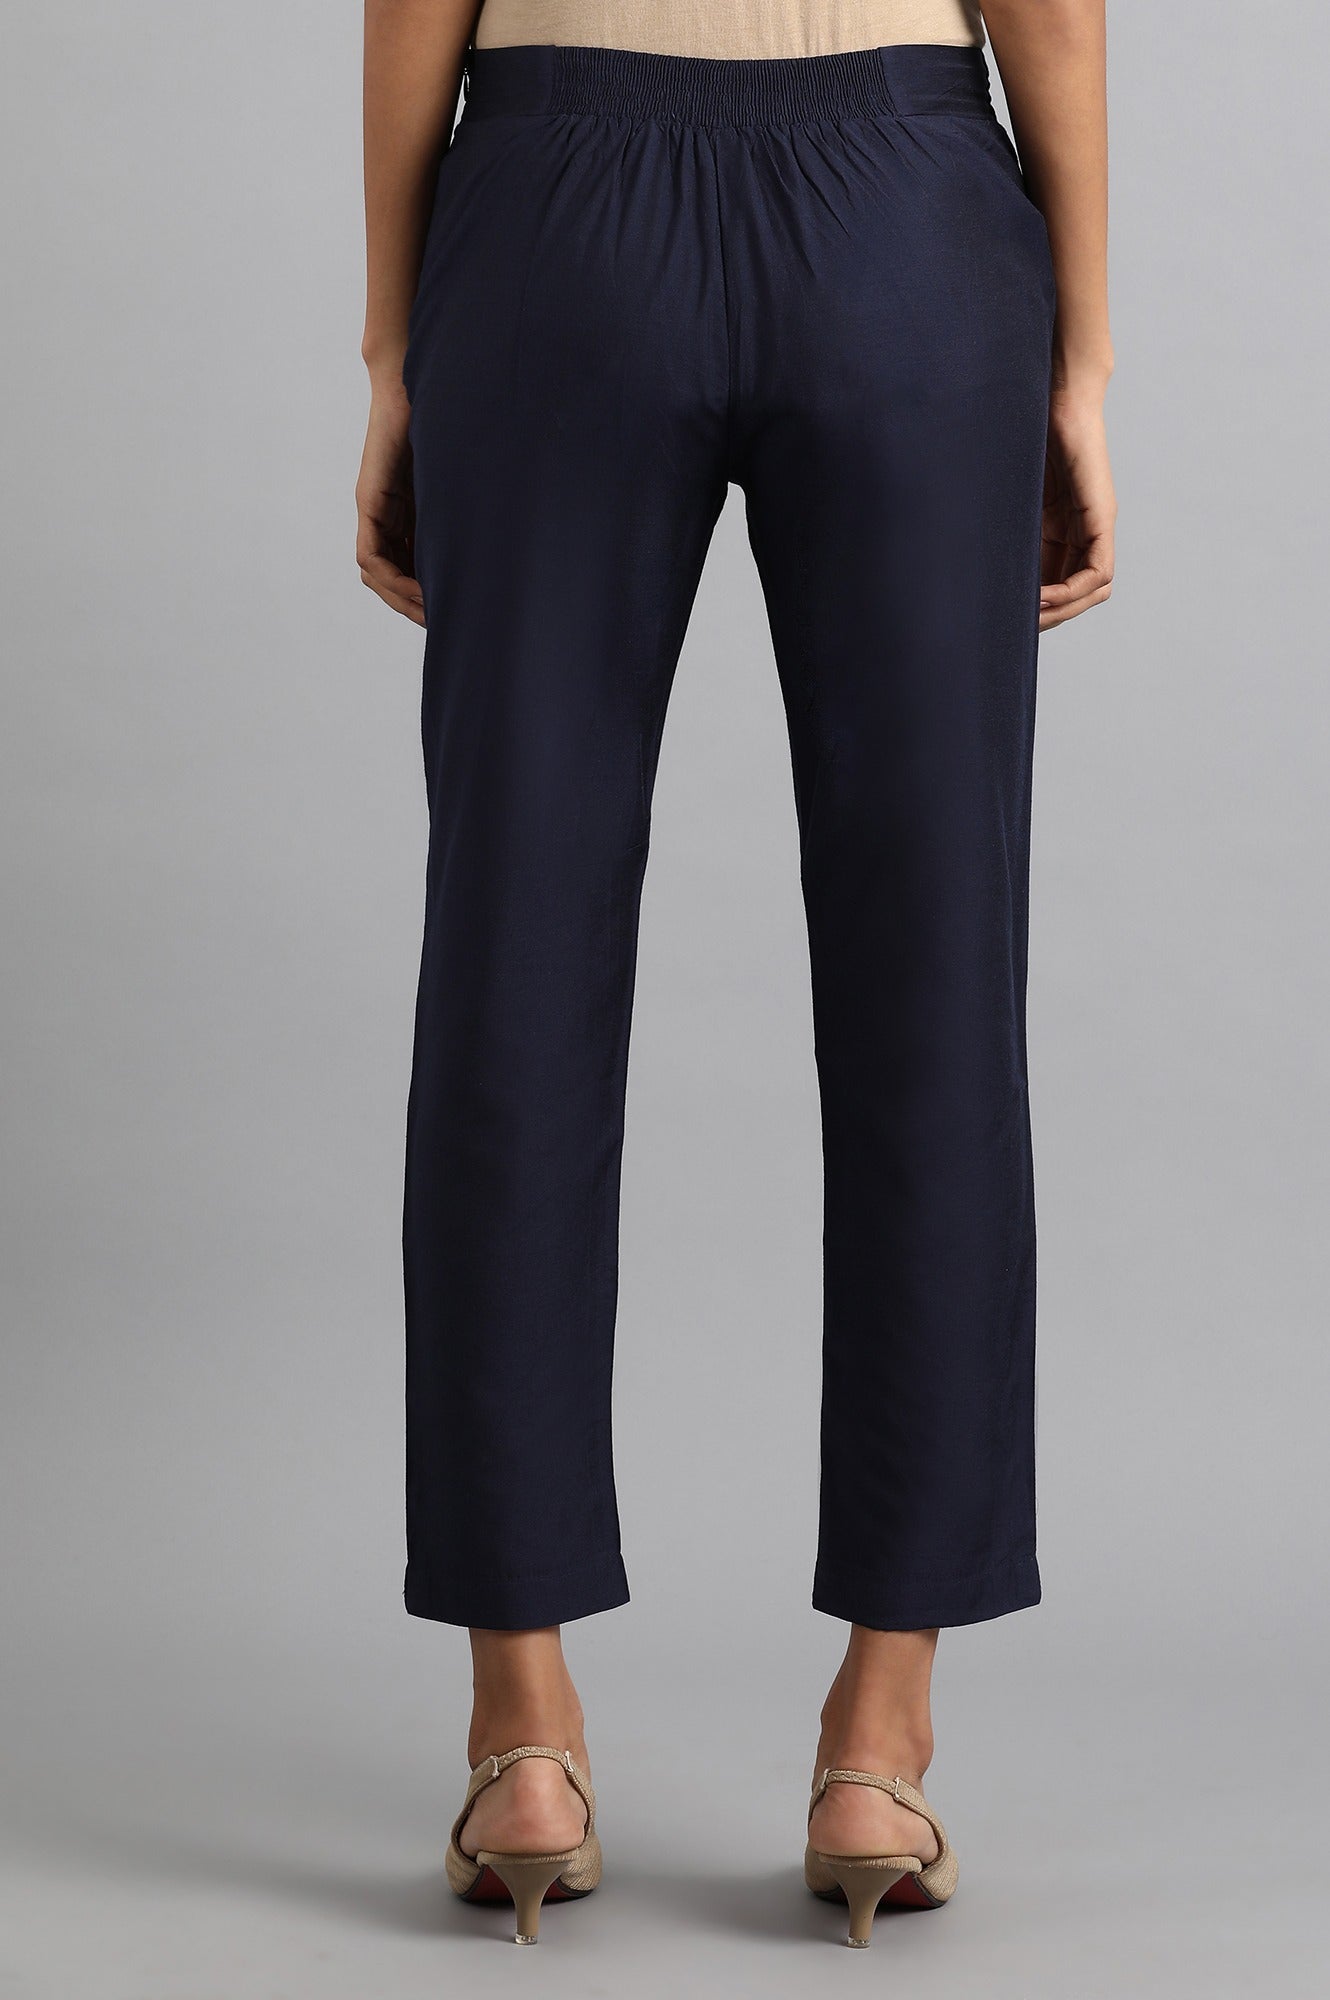 Blue Ankle Length Trousers